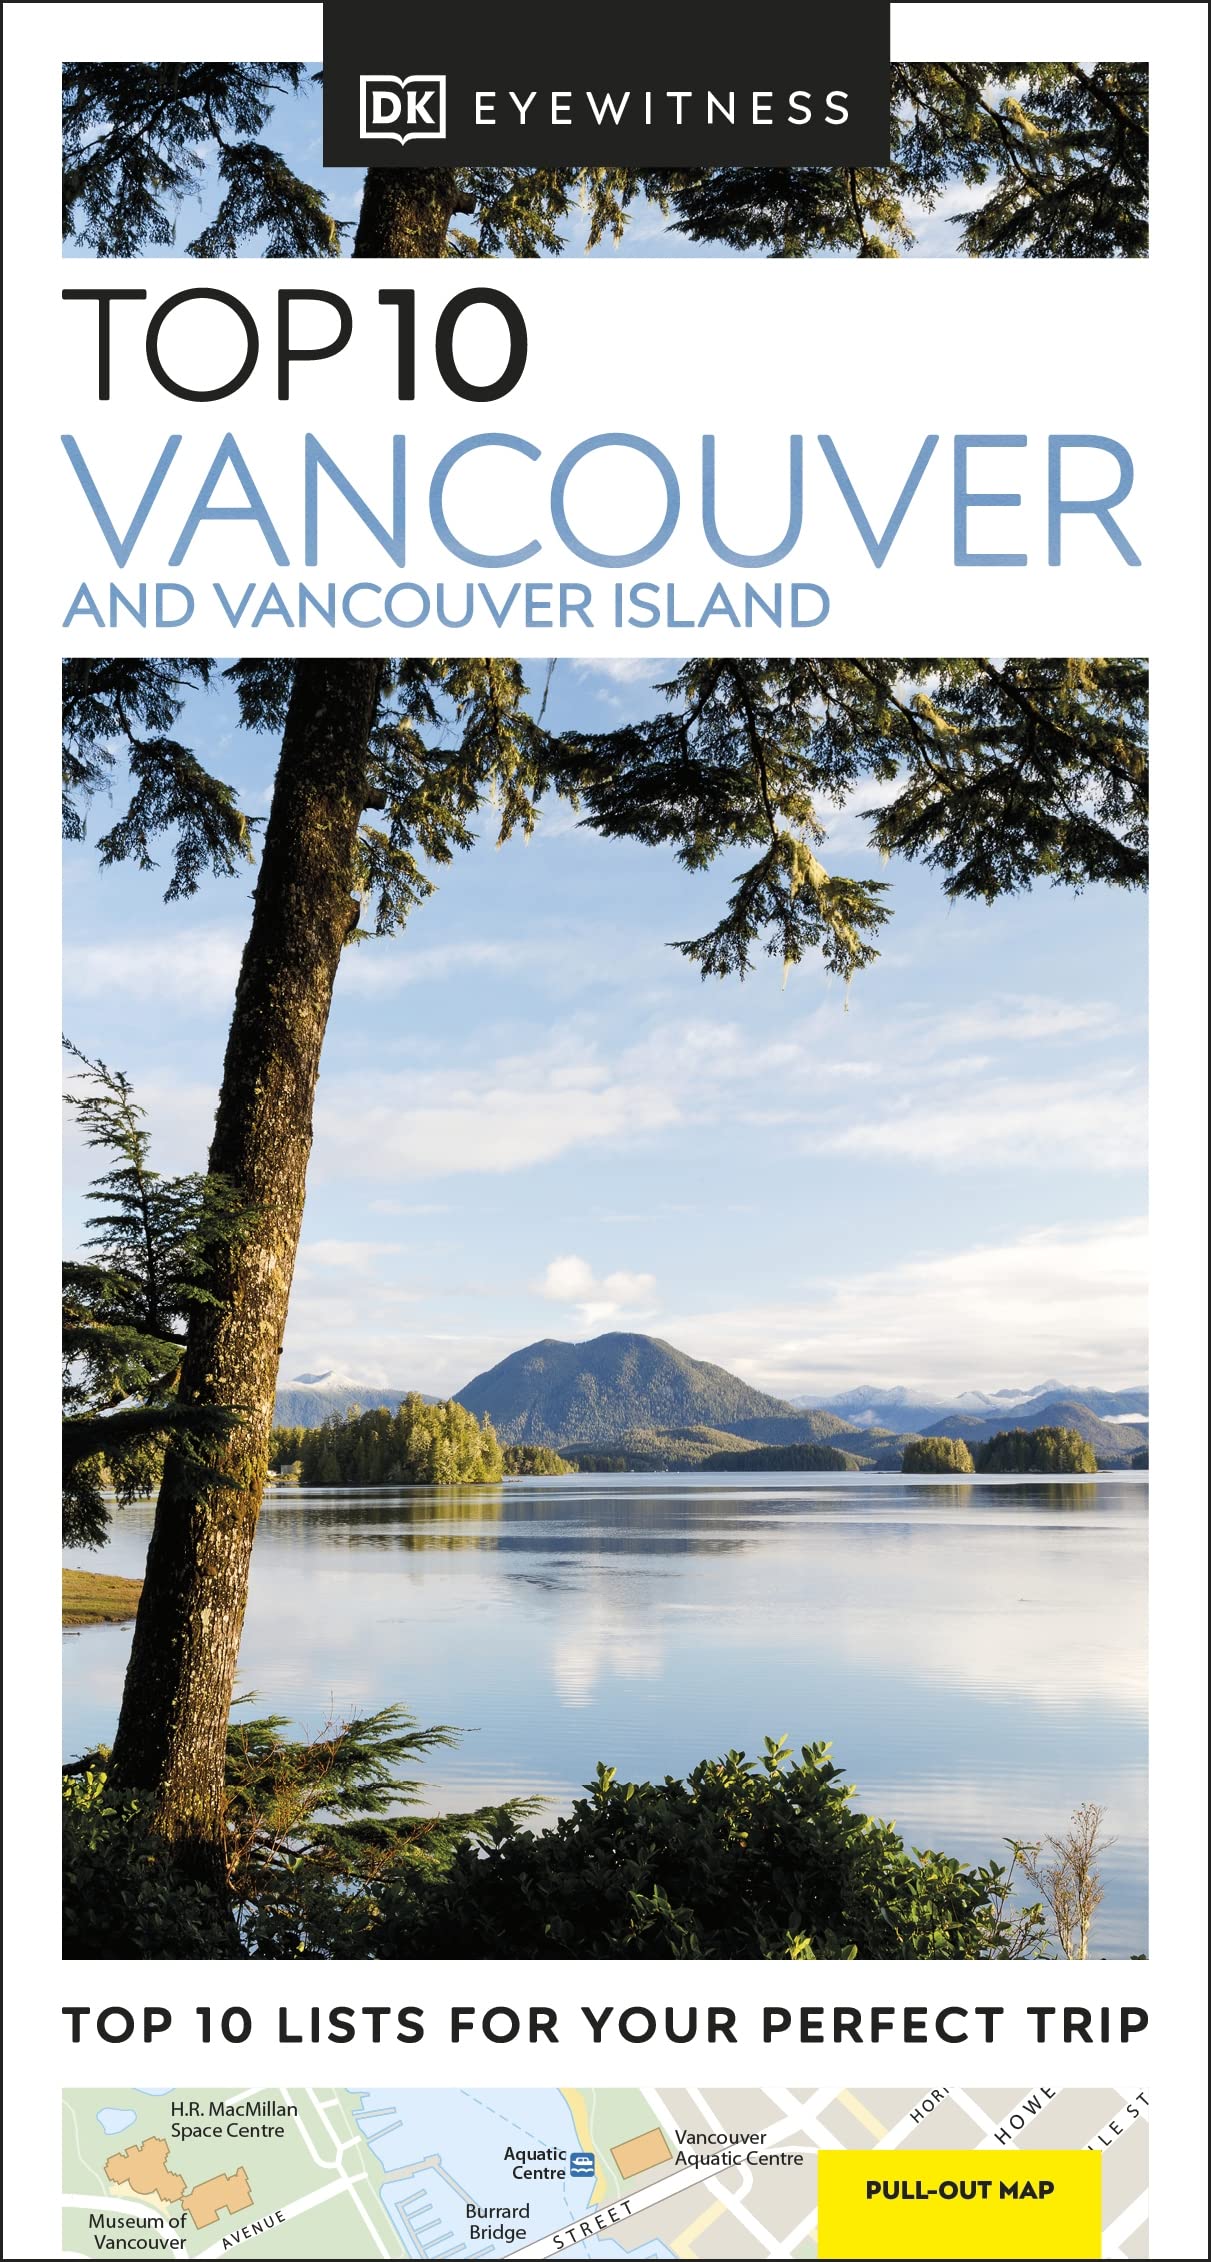 Vancouver and Vancouver Island